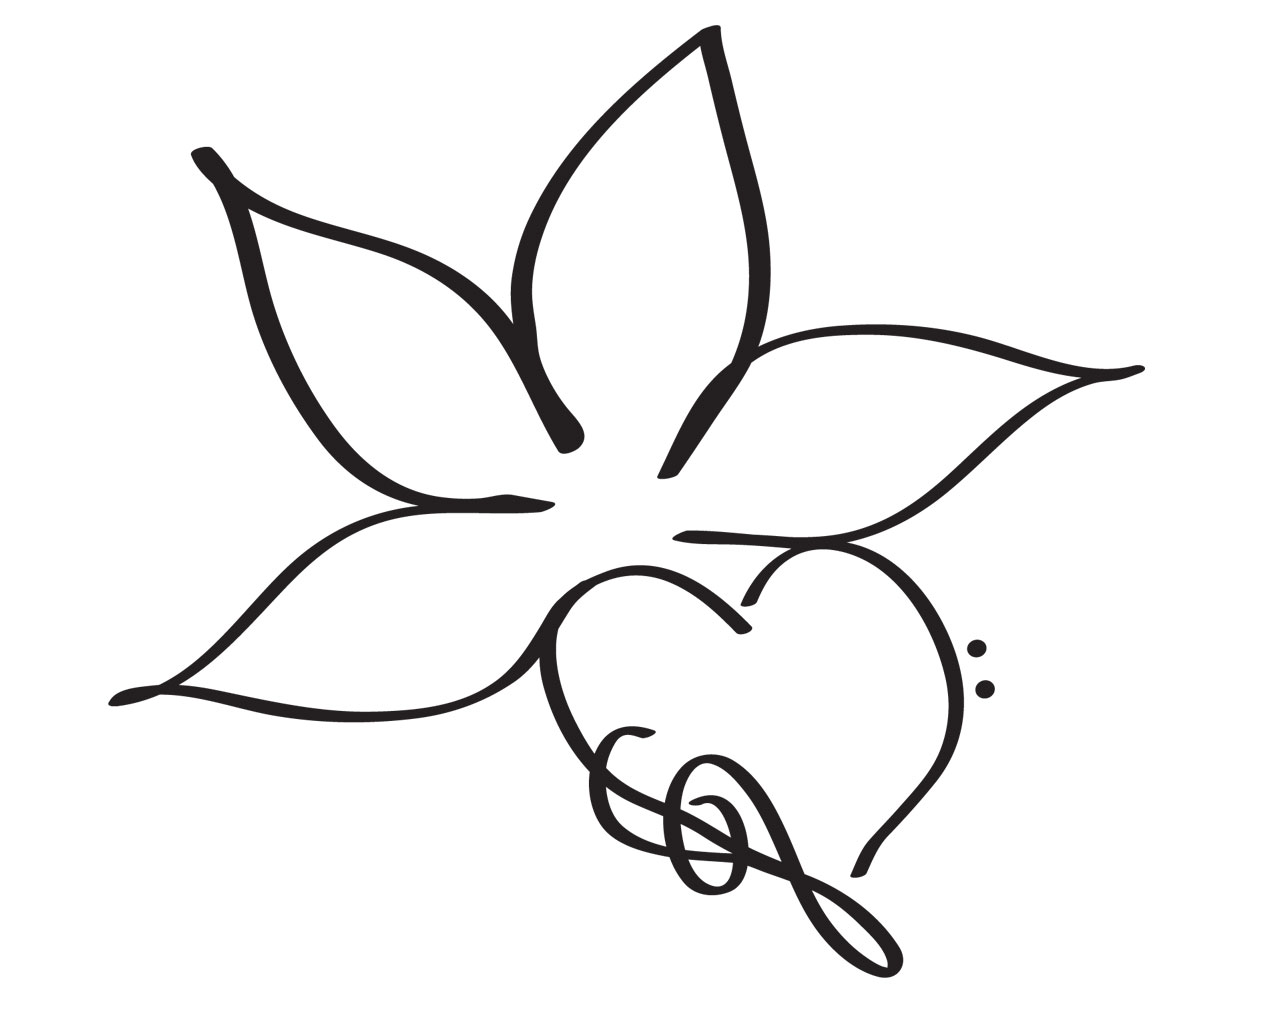 Flower Sketch Stock Illustrations, Cliparts and Royalty Free Flower Sketch  Vectors